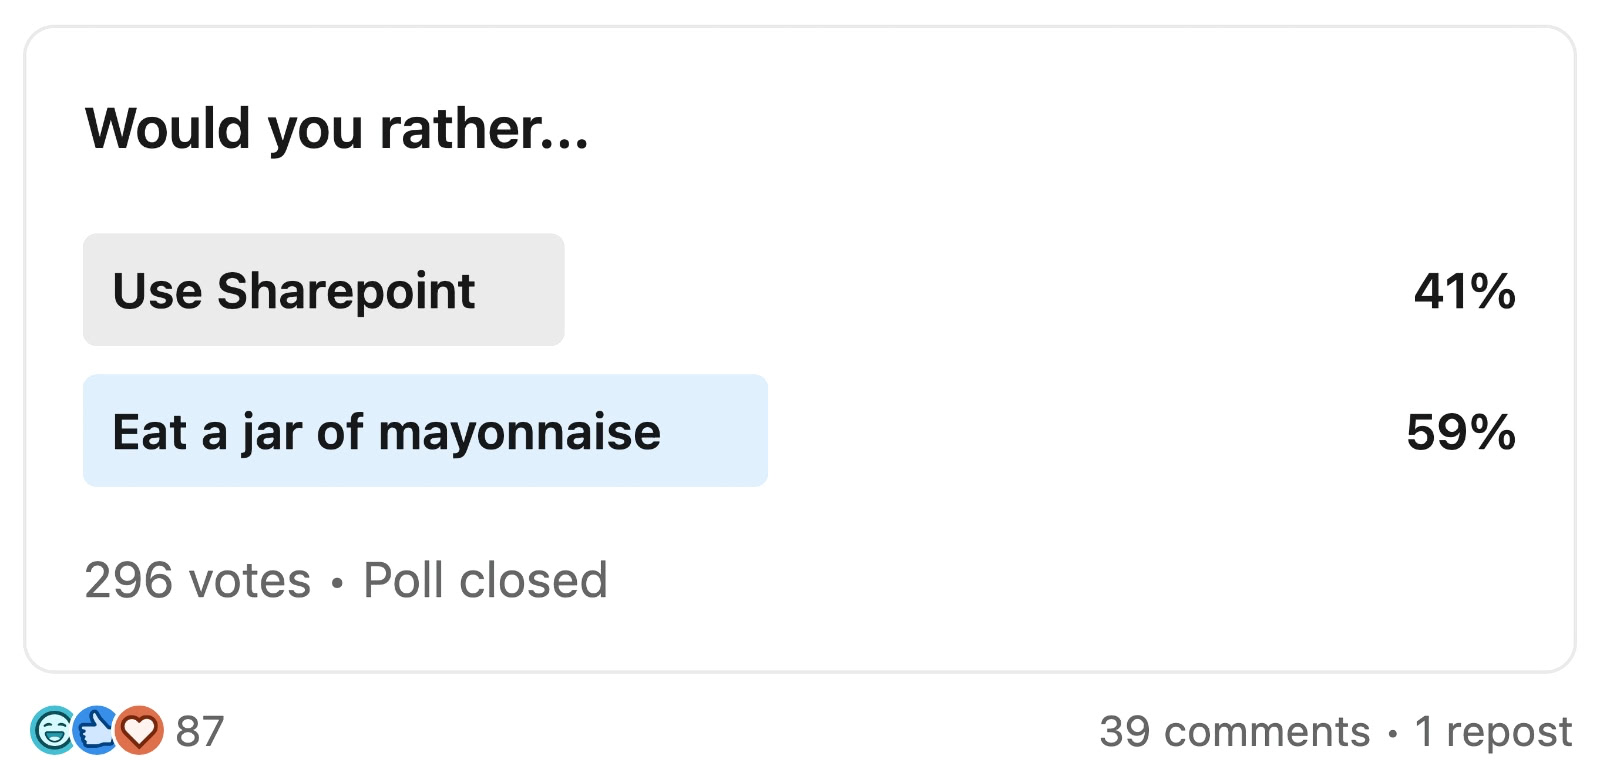 A poll showing that people would rather eat a jar of mayonnaise than use SharePoint.